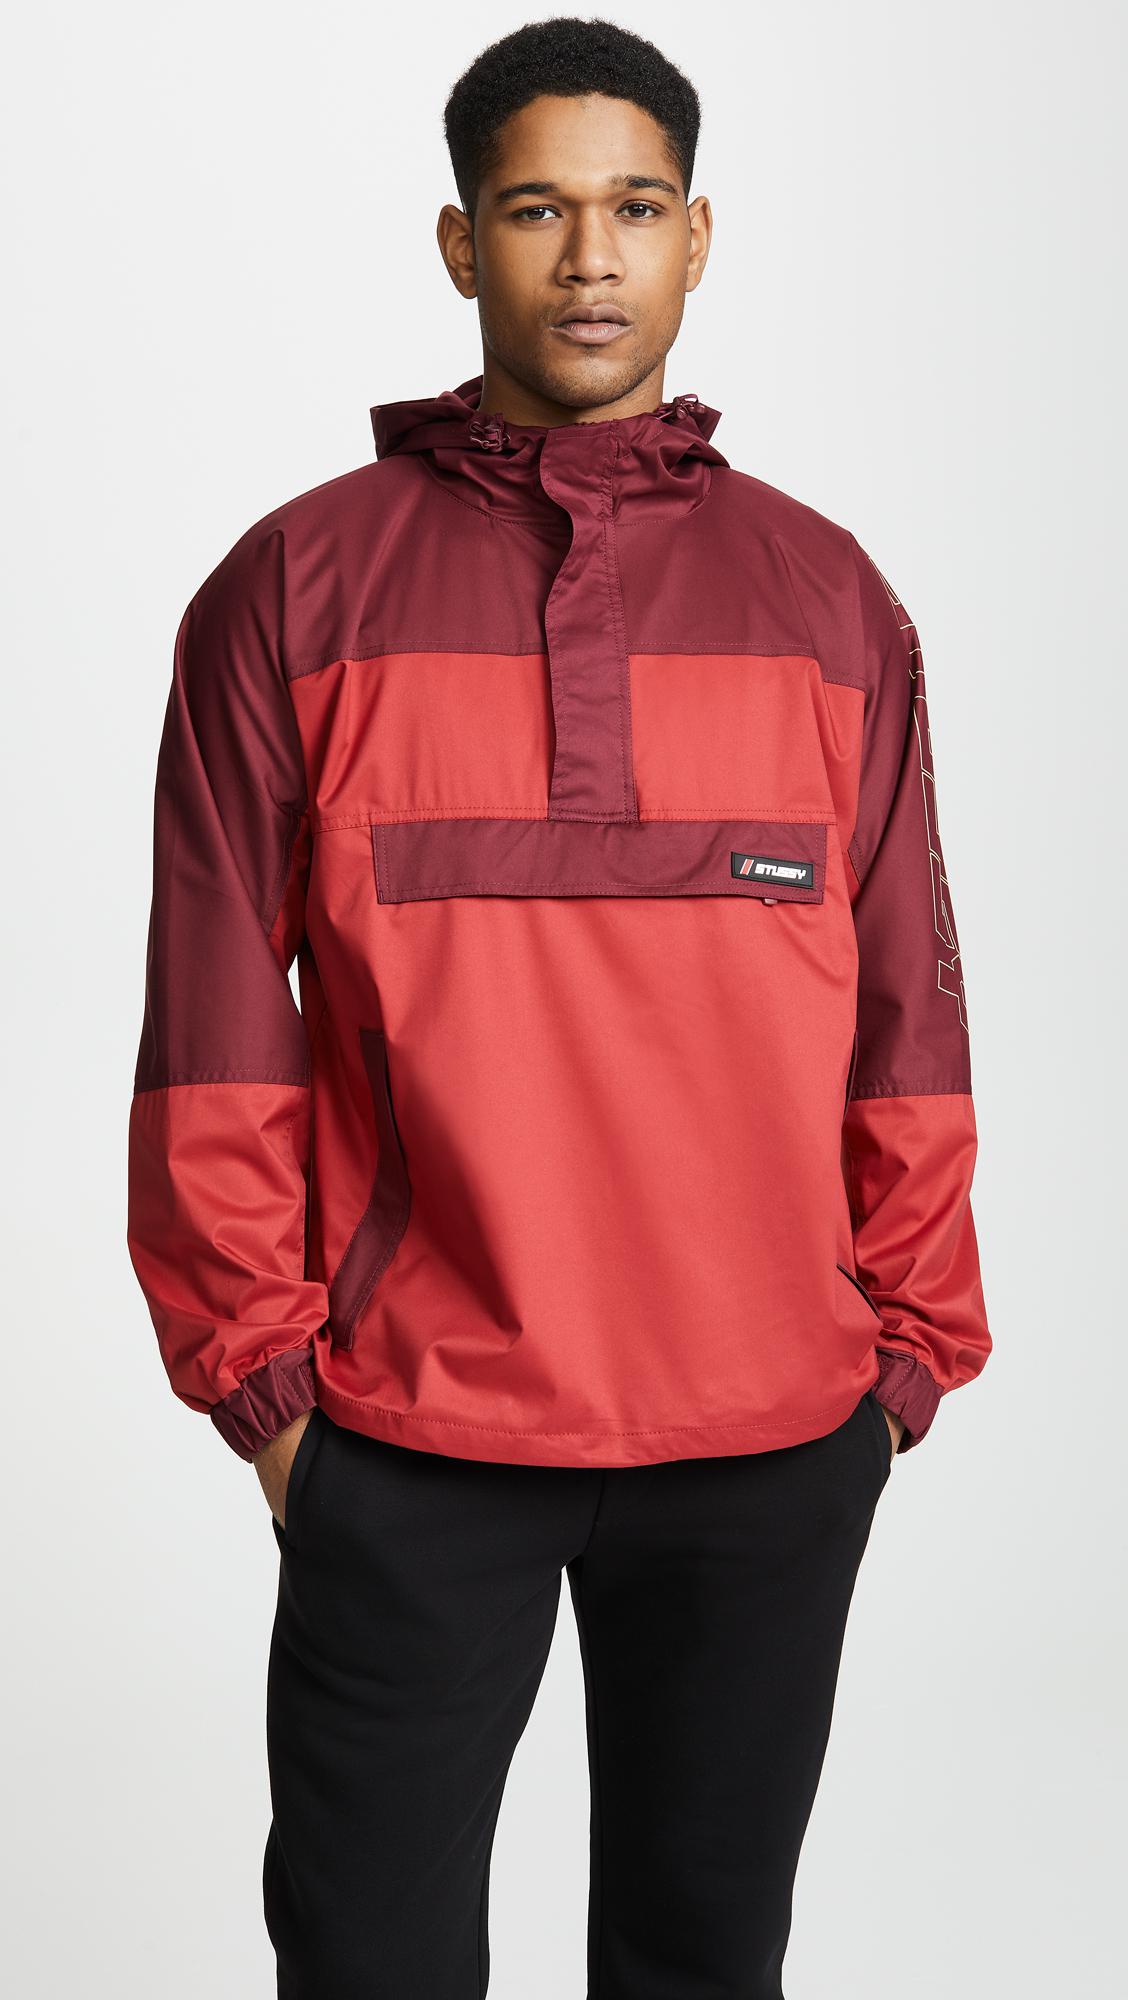 Lyst - Stussy Alpine Pullover Jacket in Red for Men - Save ...